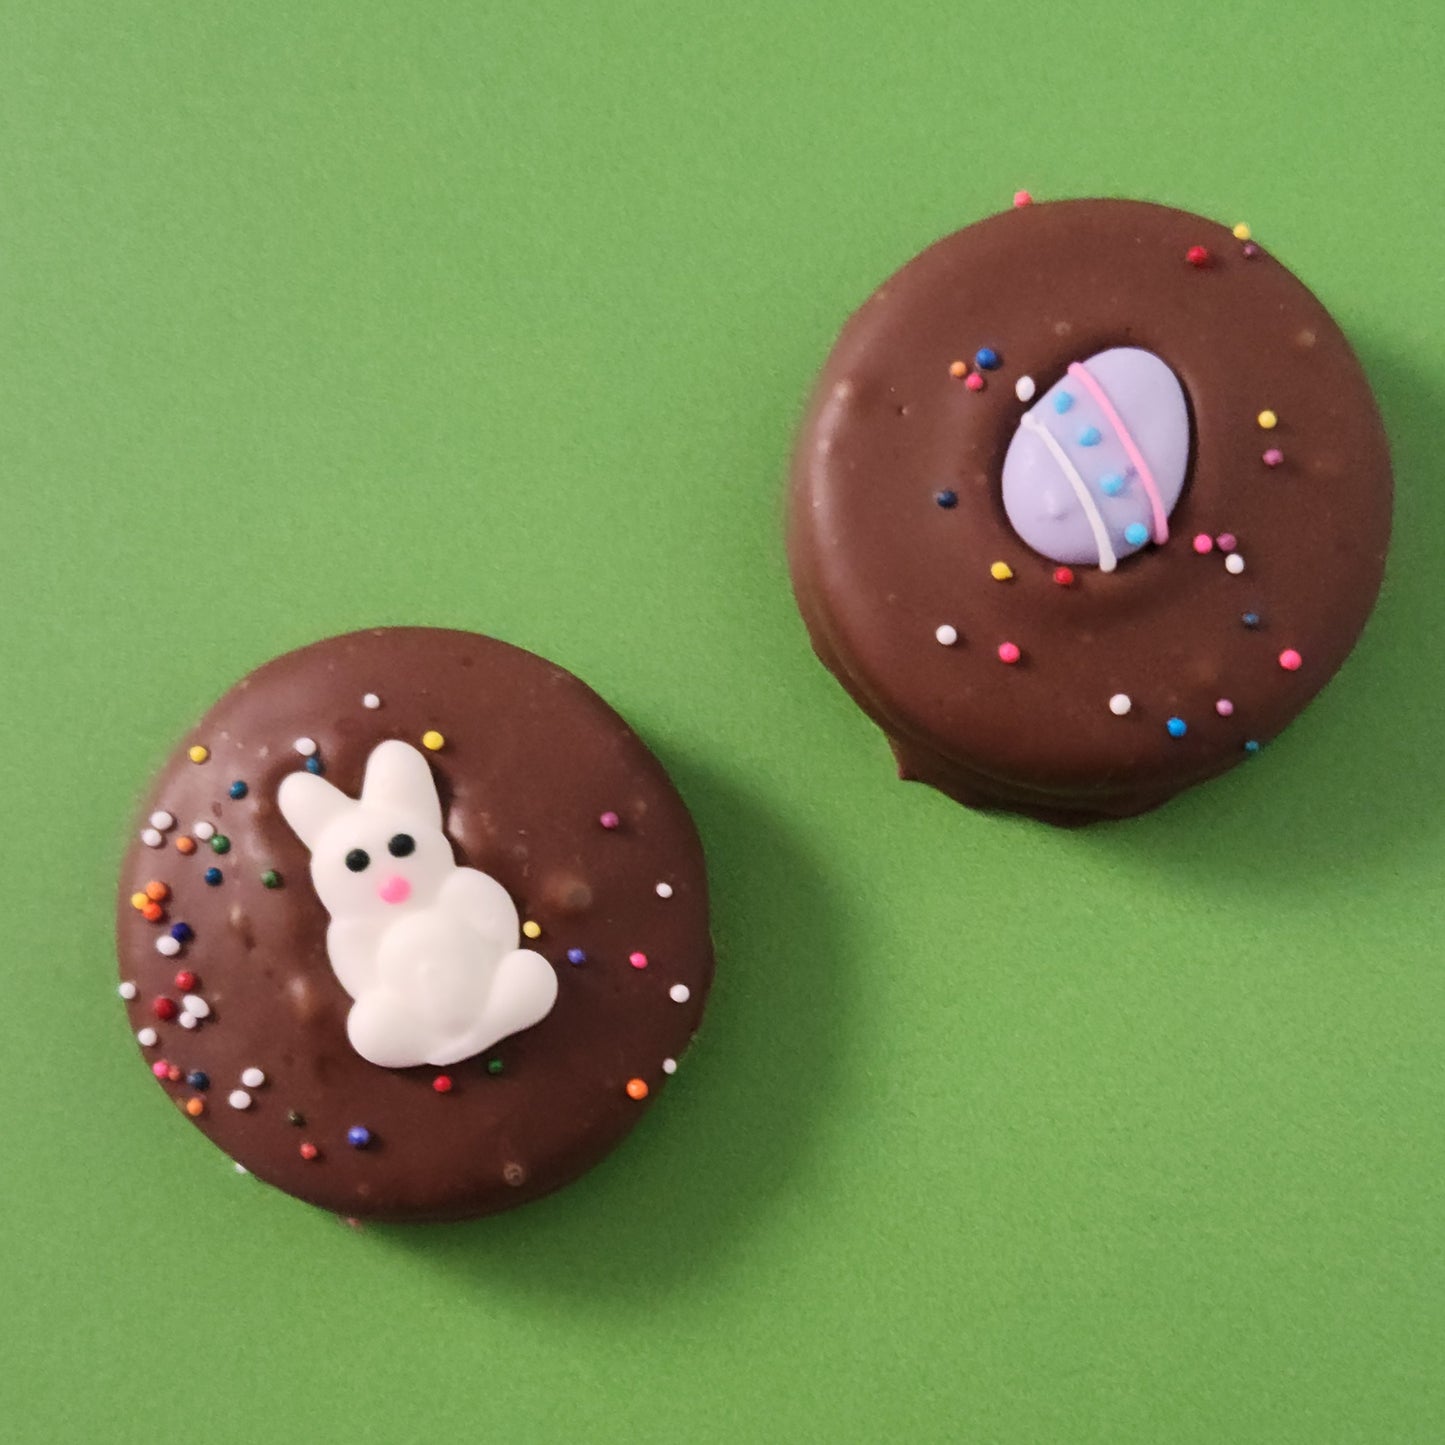 Easter Themed Oreo Cookies Covered in Chocolate